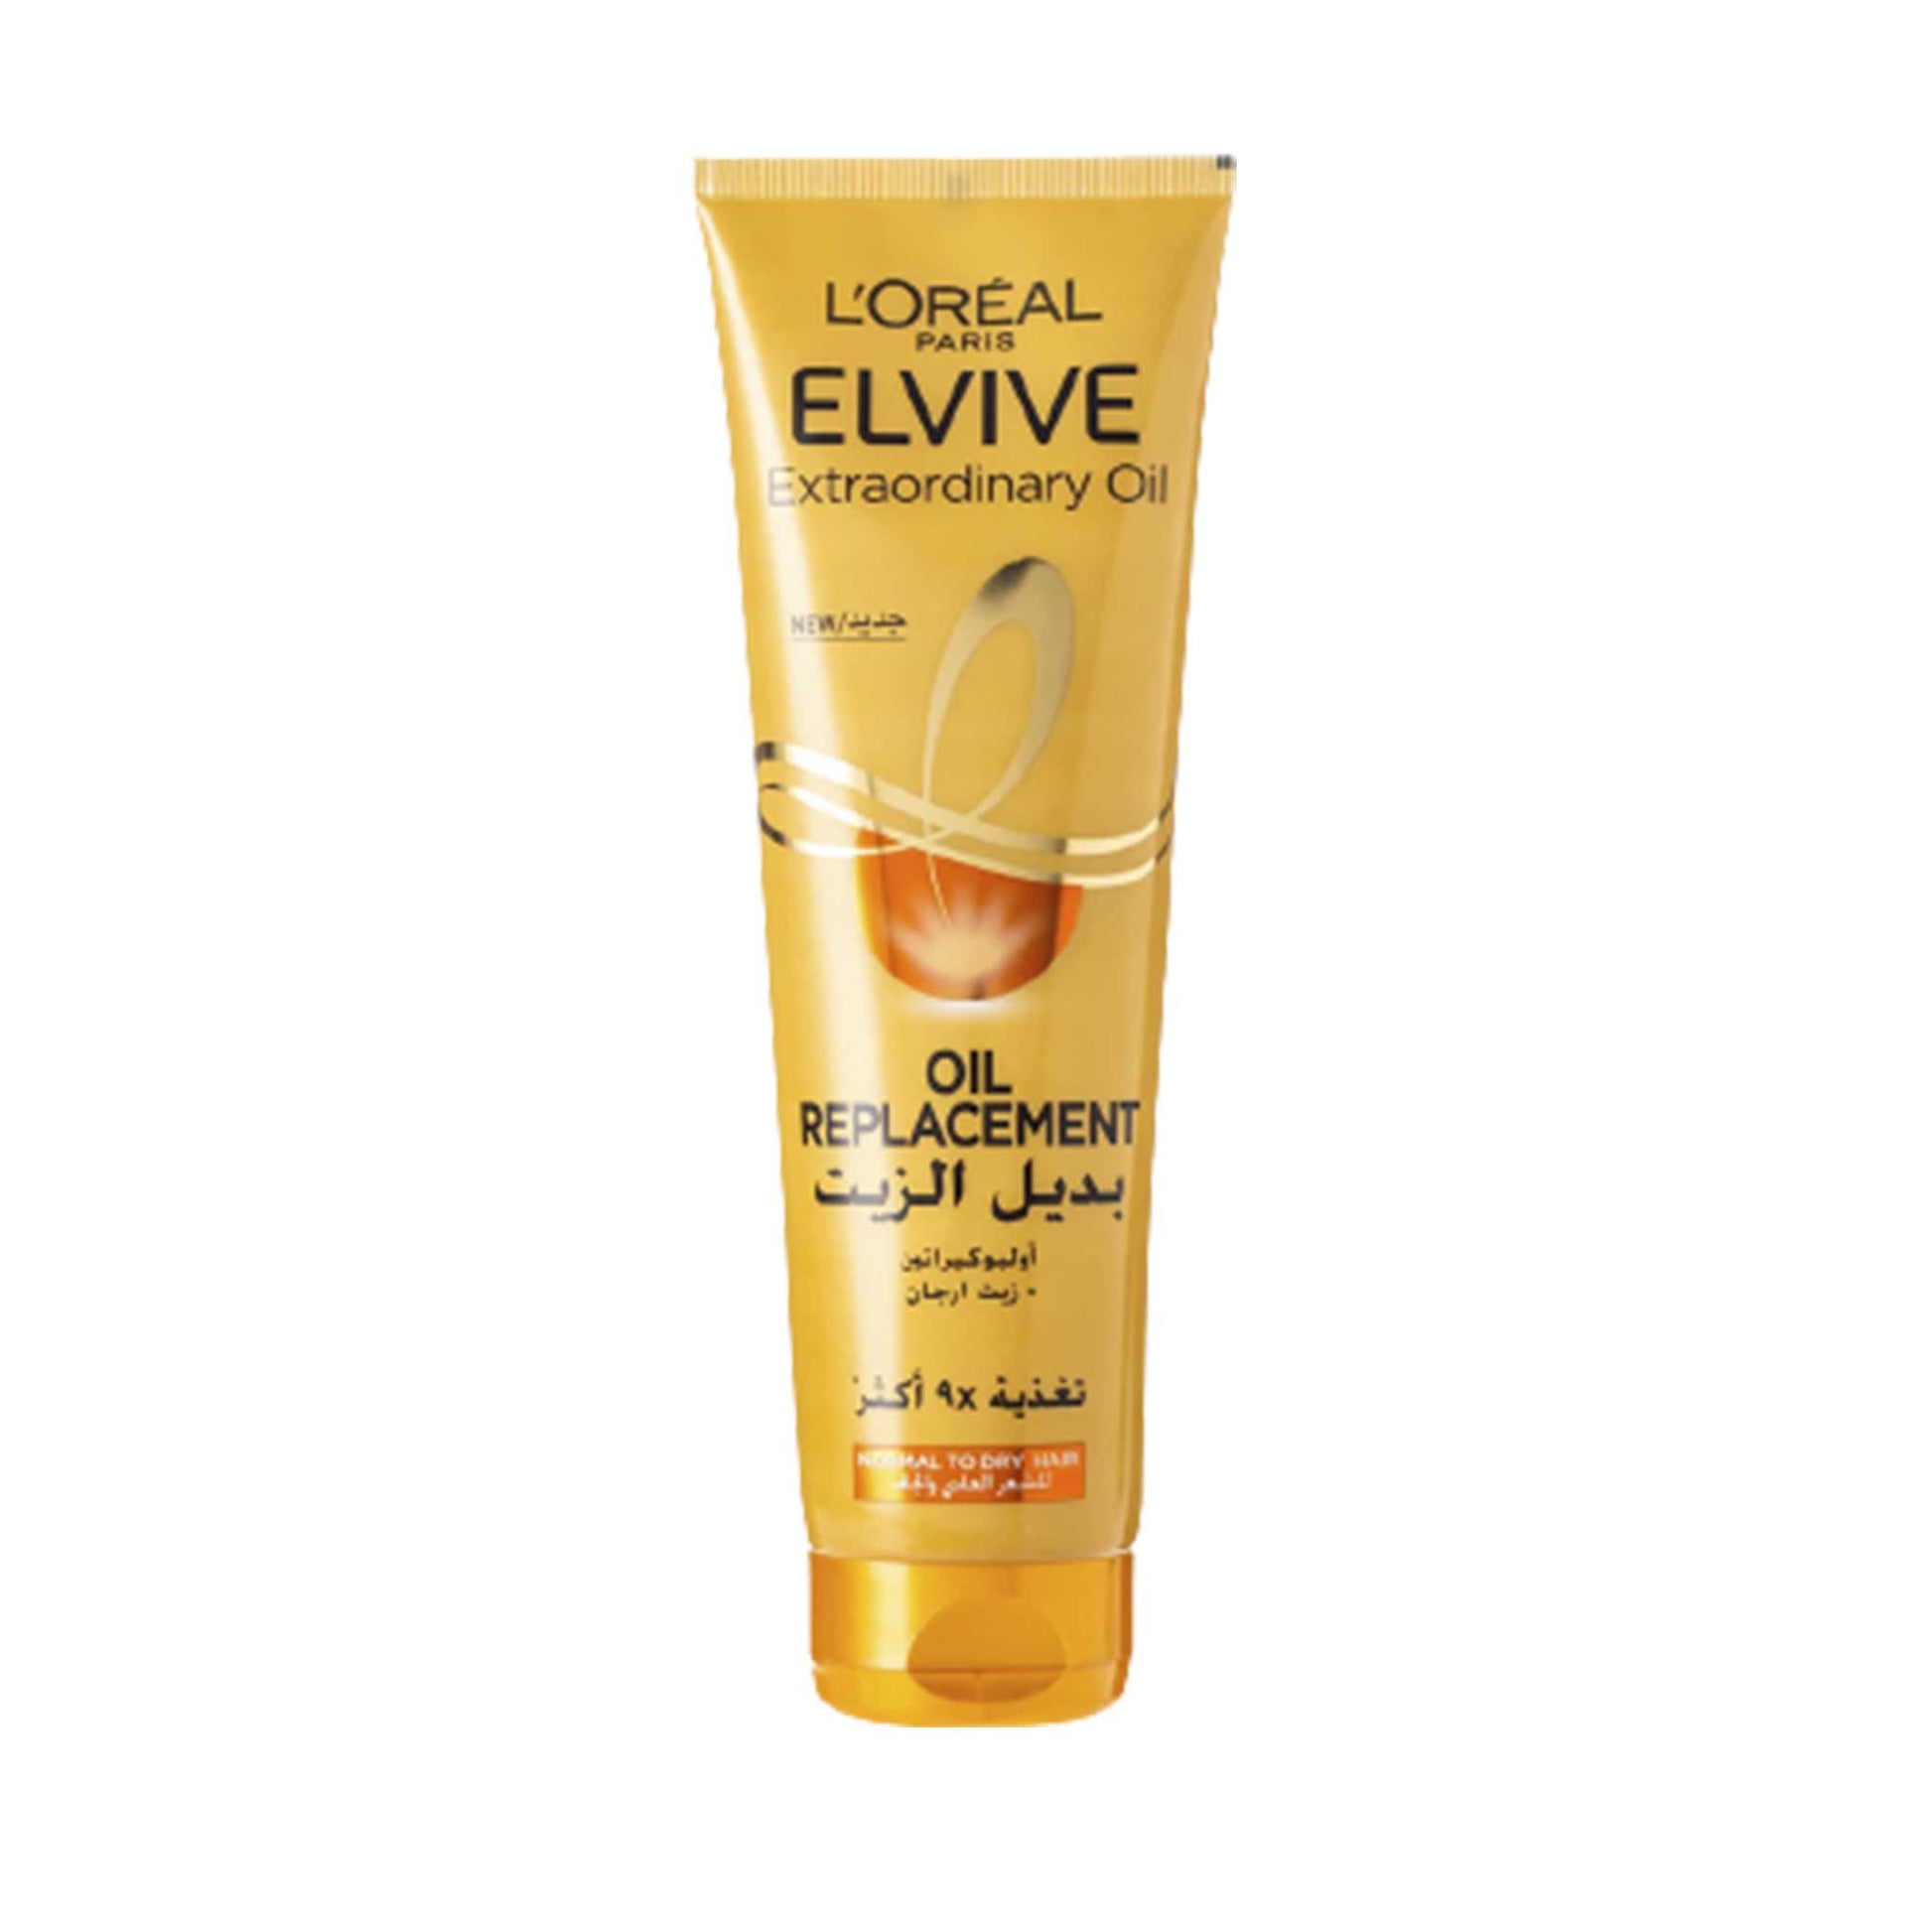 L'oreal Elvive Extraordinary Oil Replacement L'Oreal